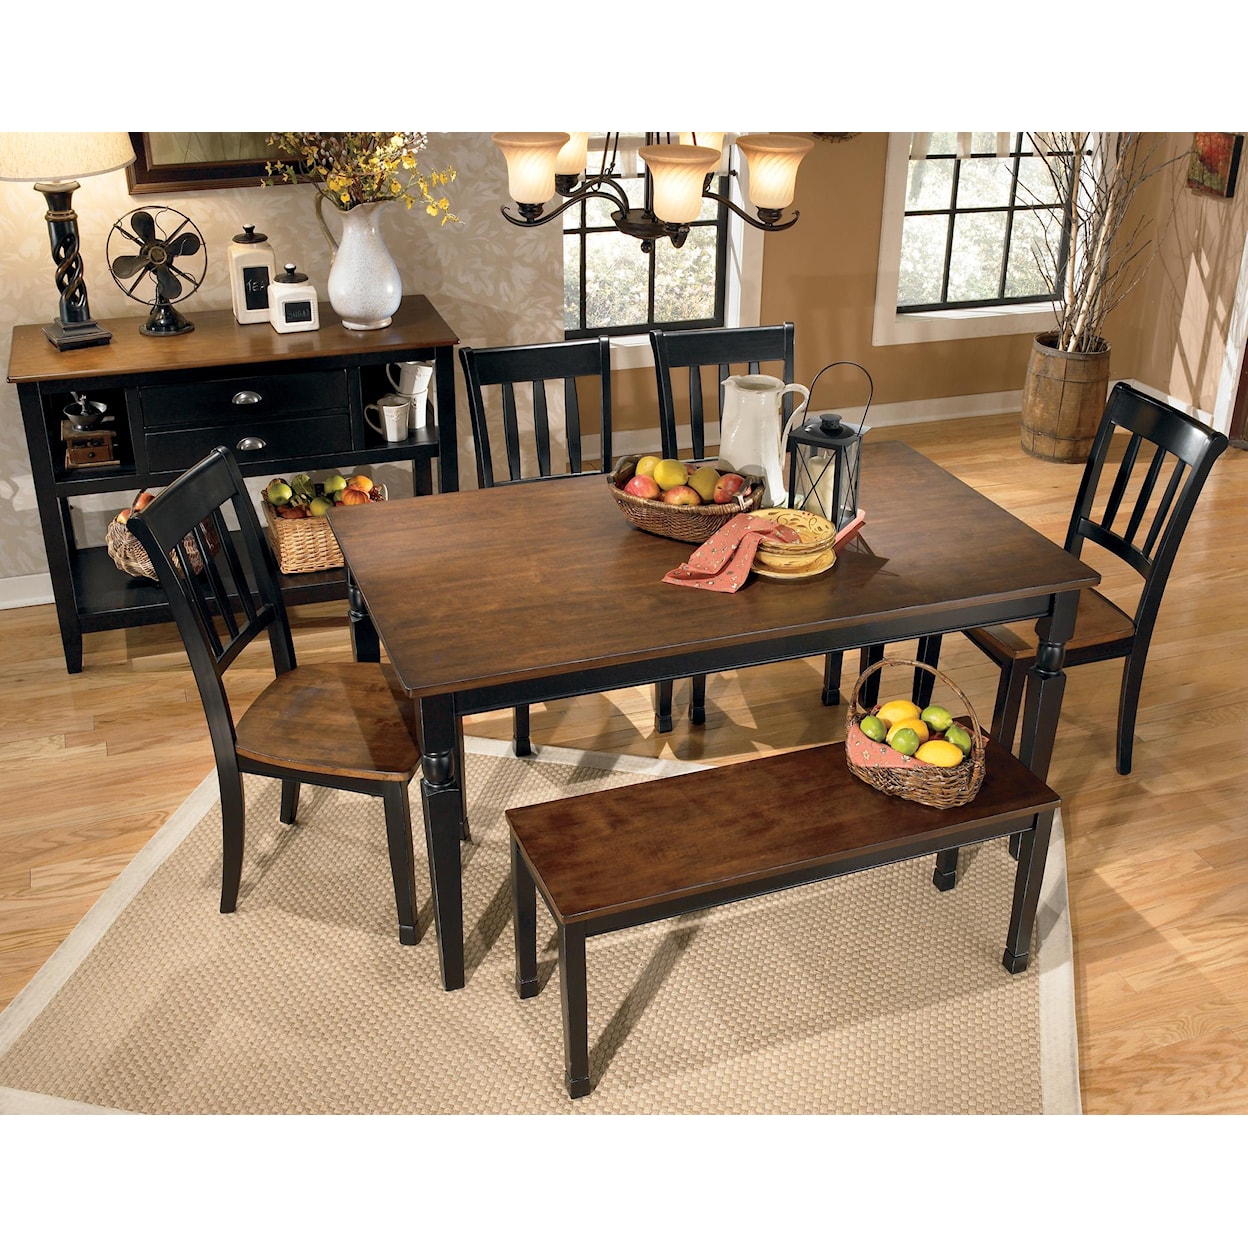 Michael Alan Select Owingsville Large Dining Room Bench